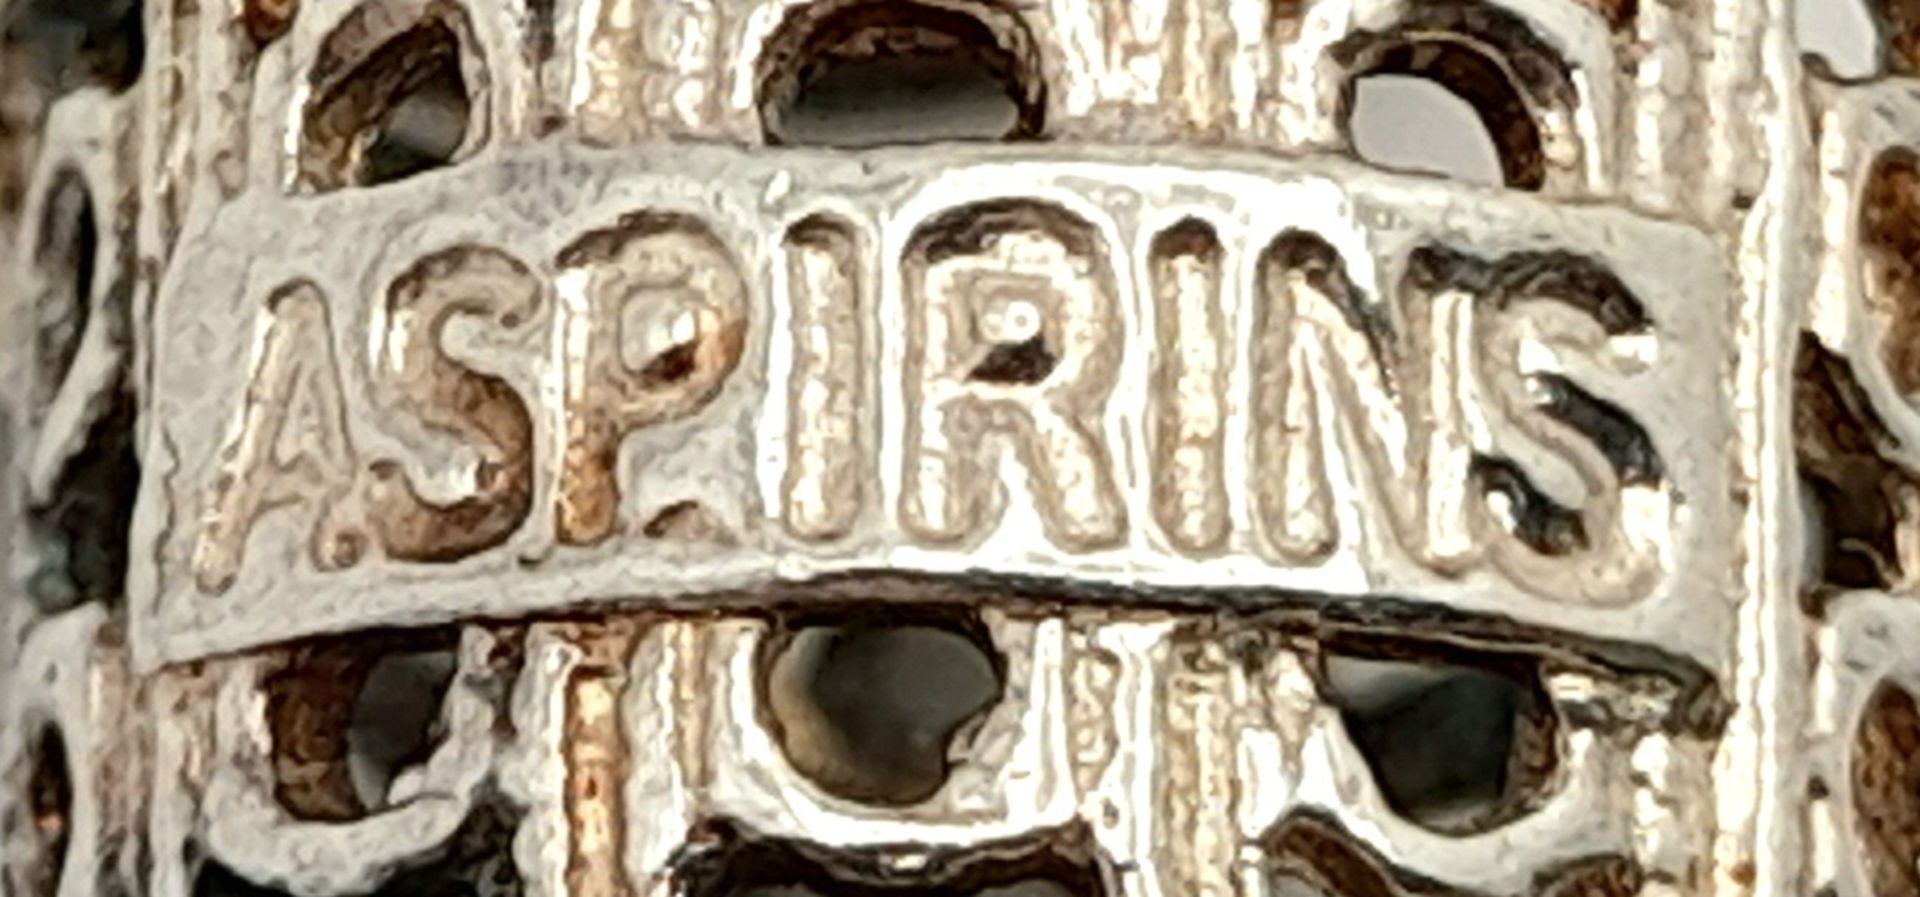 A STERLING SILVER ASPIRIN TABLET BOX CHARM ENGRAVED WITH THE WORD ASPIRINS, WHICH OPENS. 2.2cm - Image 5 of 5